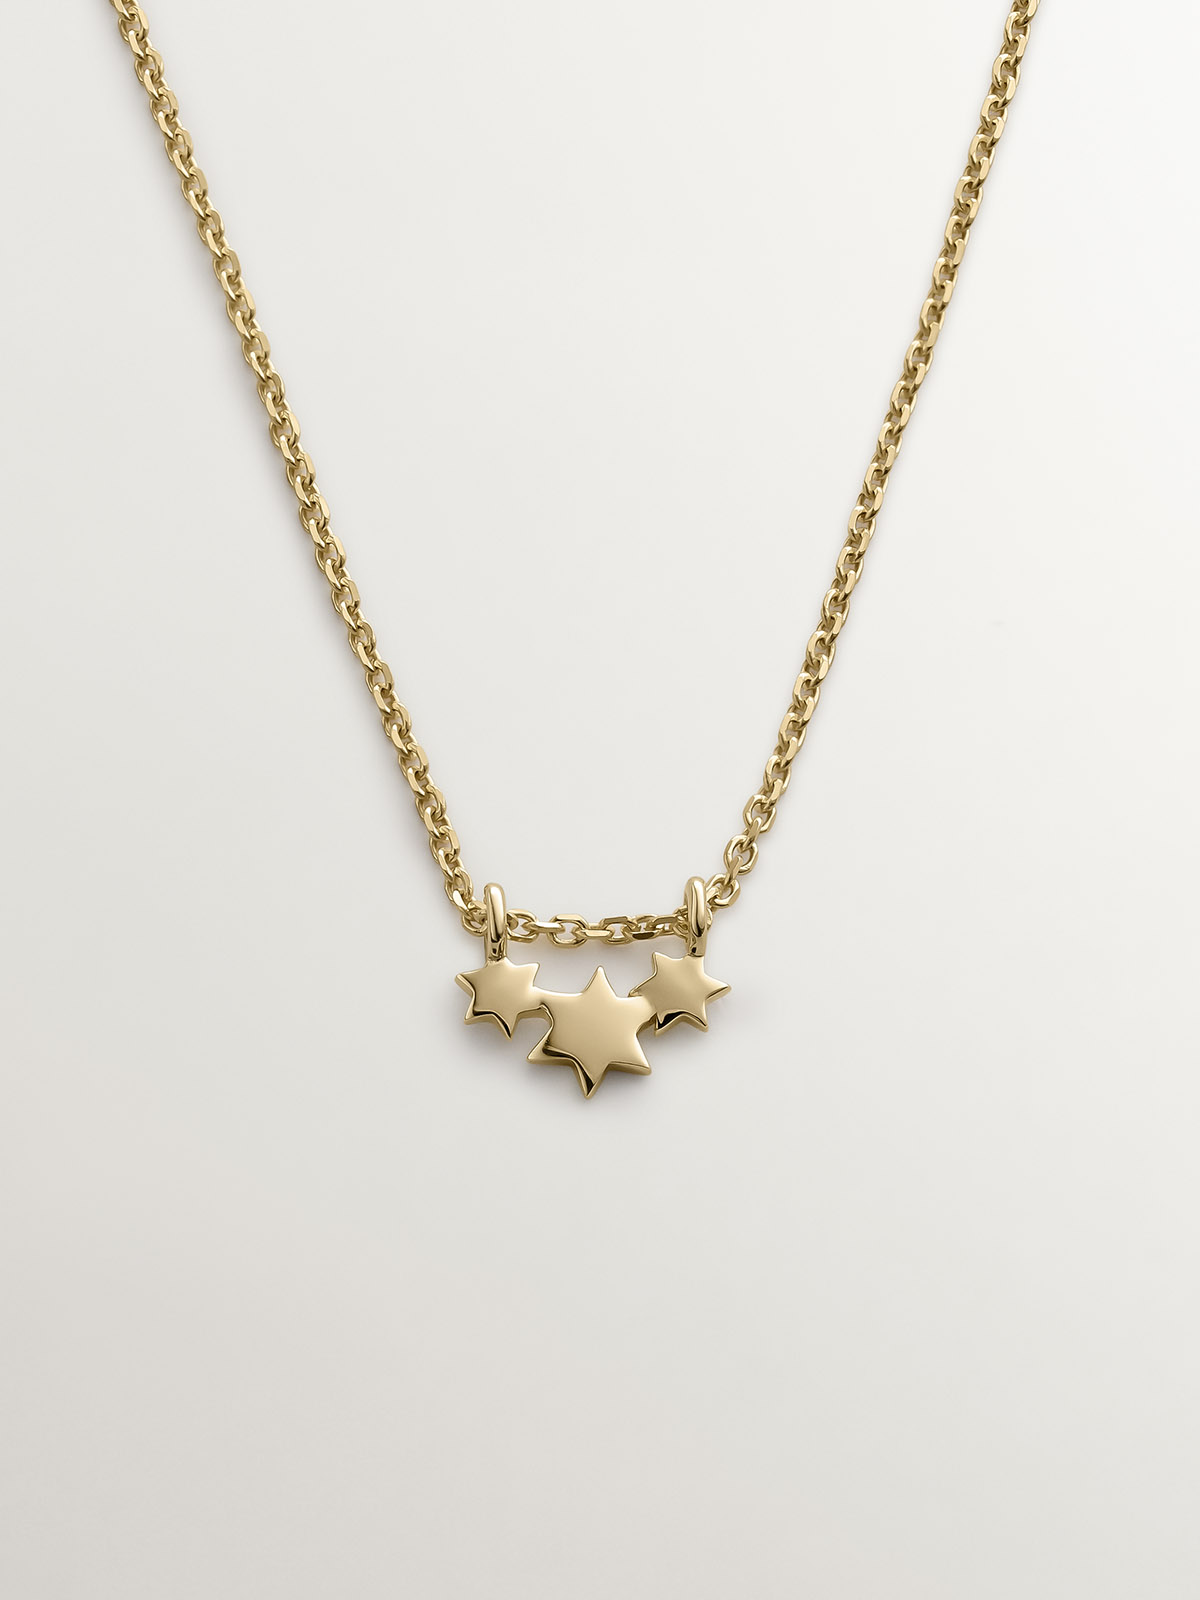 9K Yellow Gold Pendant with Stars